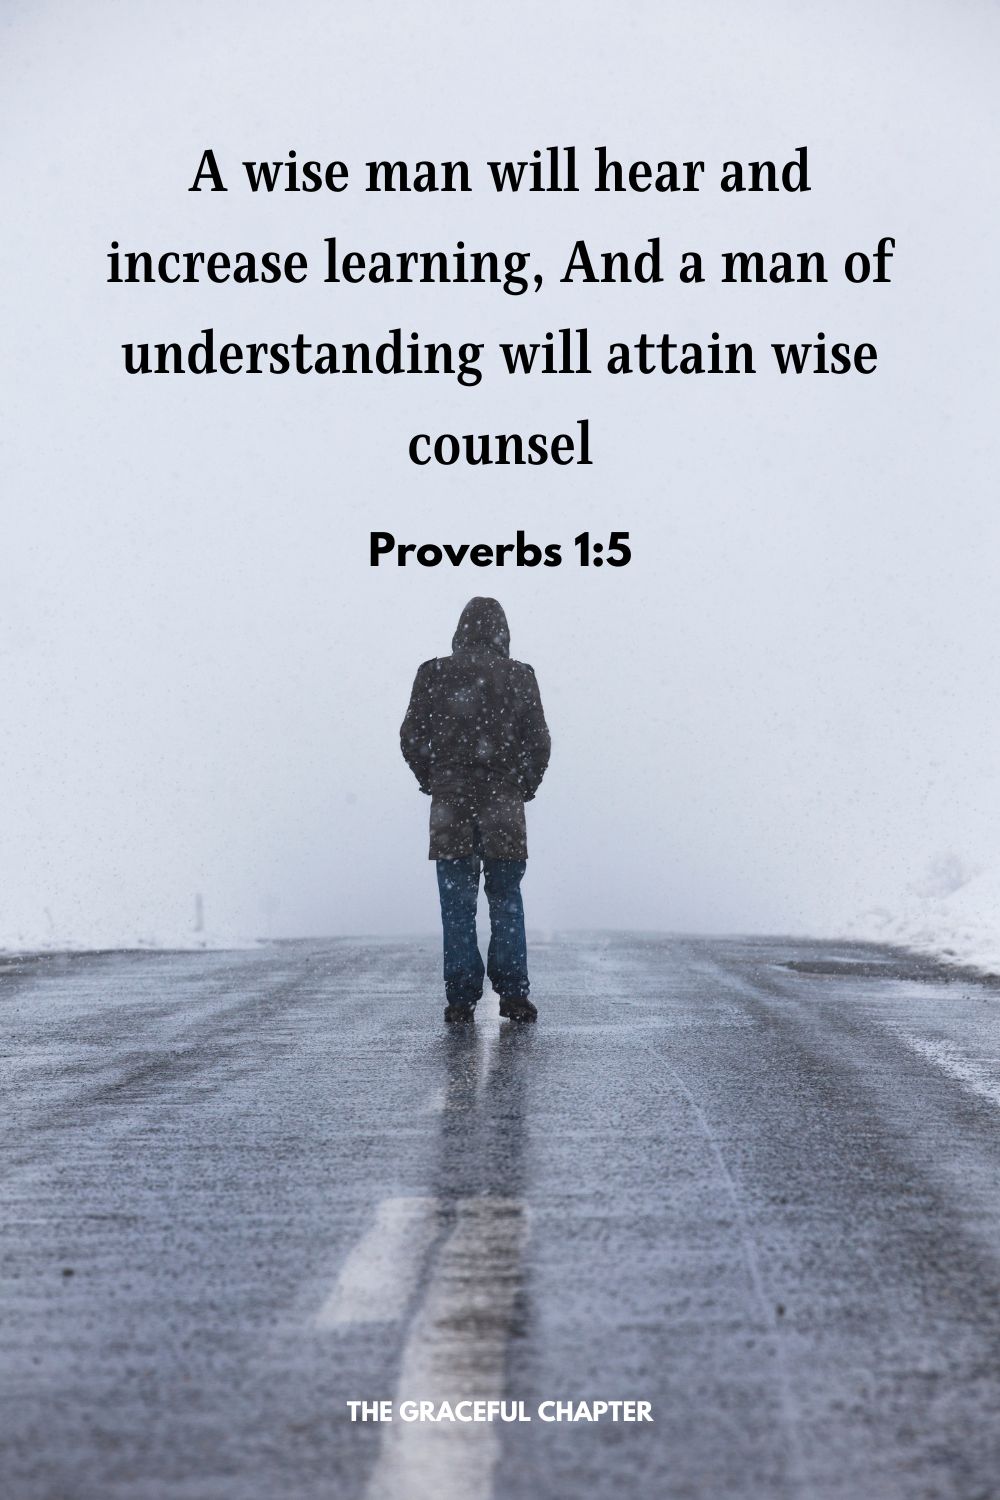 A wise man will hear and increase learning, And a man of understanding will attain wise counsel Proverbs 1:5